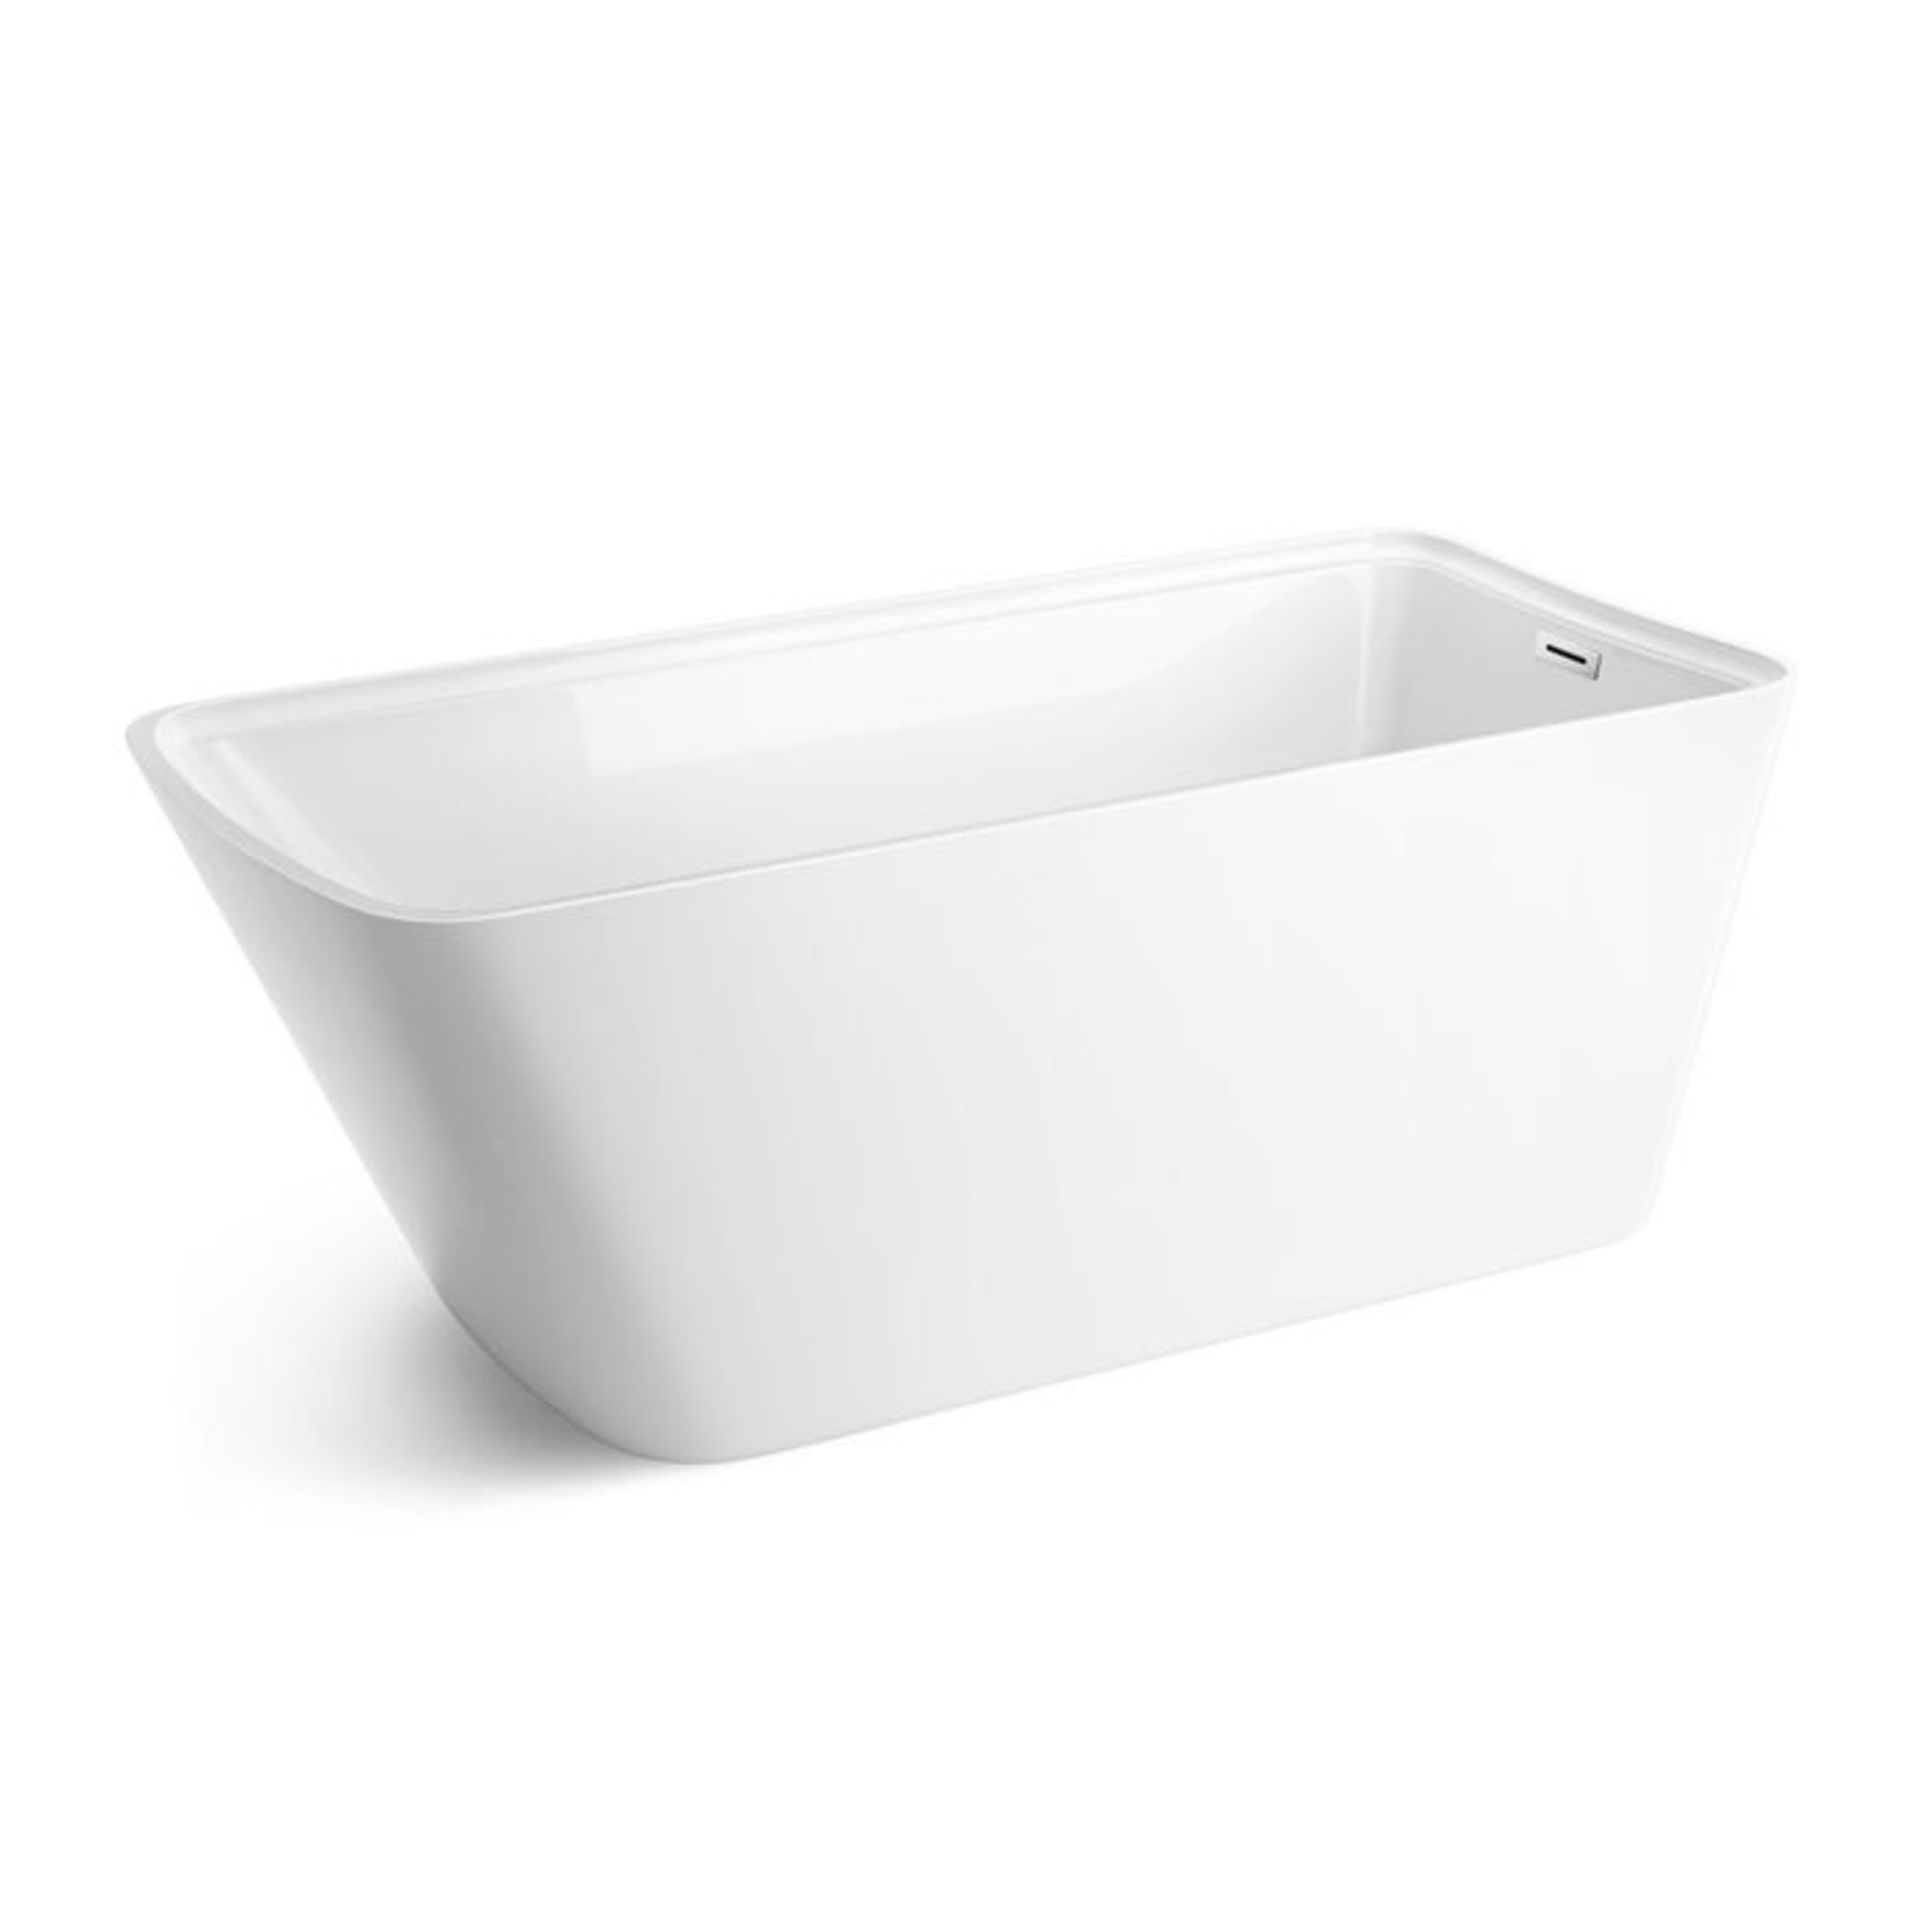 (OS56) 1700mmx780mm Freestanding Berg Bath with Bath Board. RRP £ 1,499. Showcasing style and - Image 3 of 5